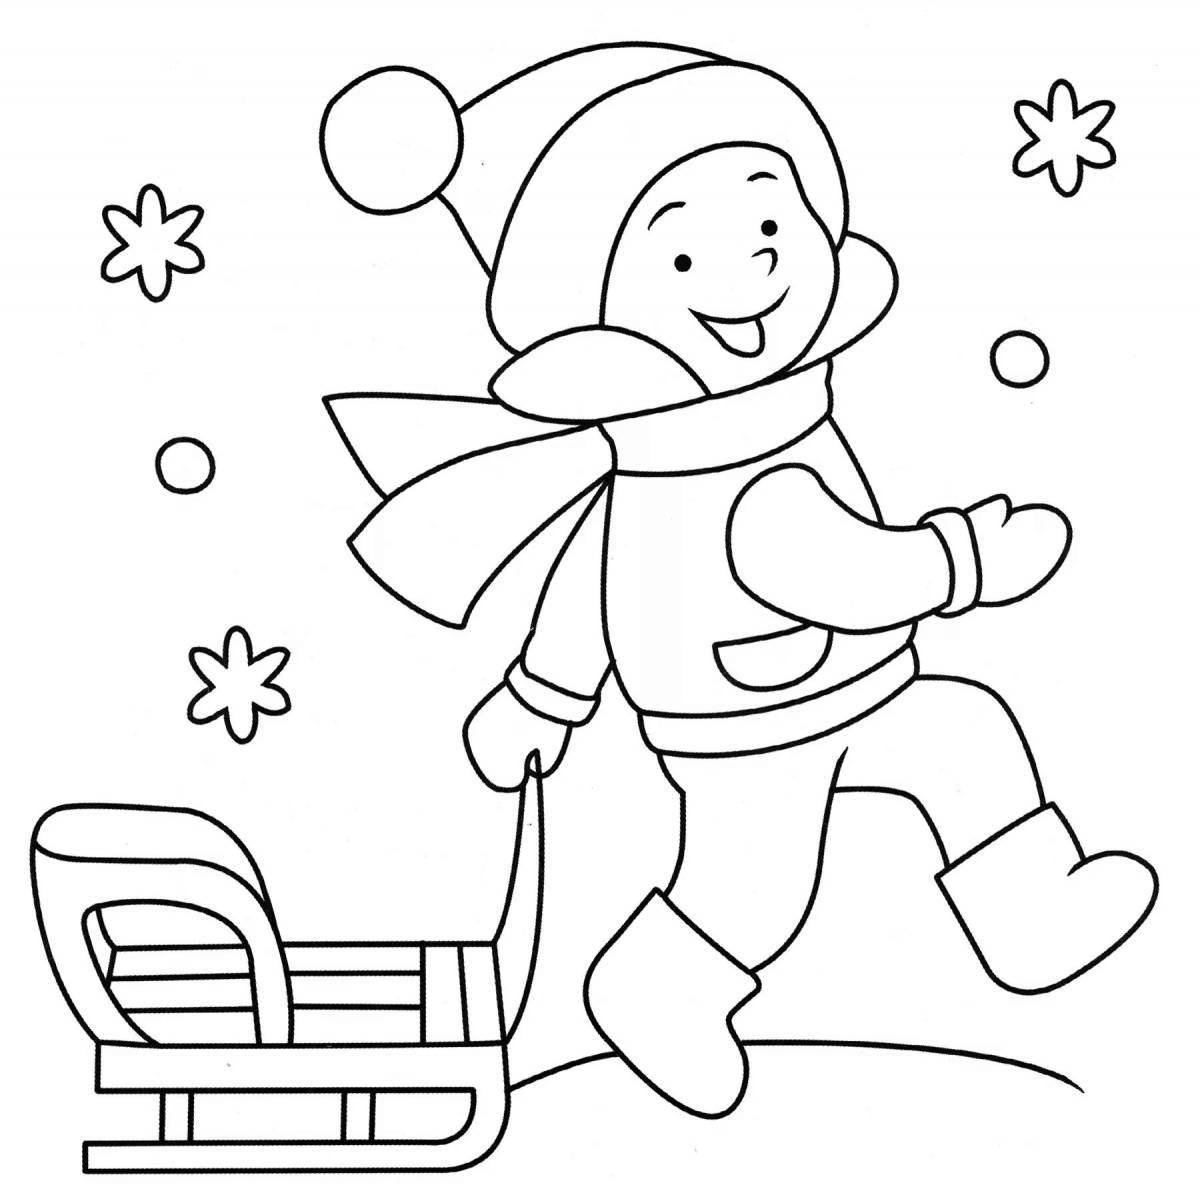 Festive winter coloring book for kids 2 3